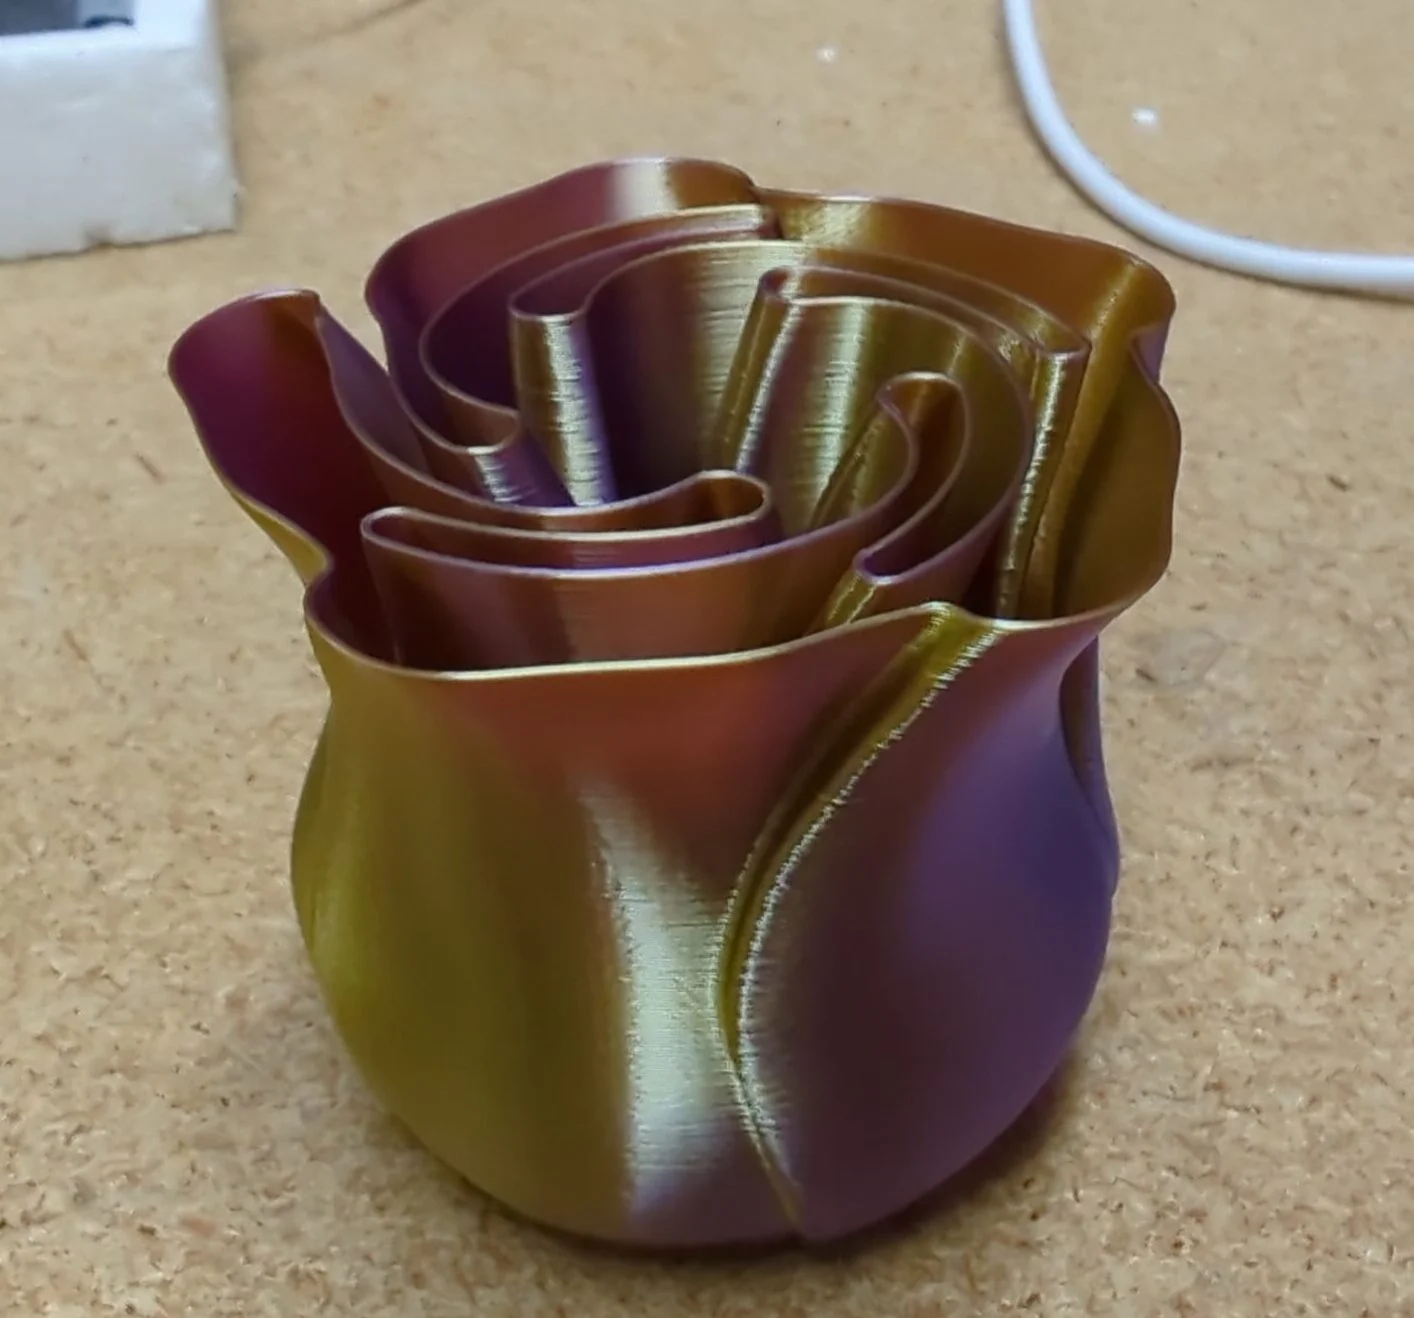 Try this Vase Mode Cura Profile on your Ender 3 S1 / Pro class printers